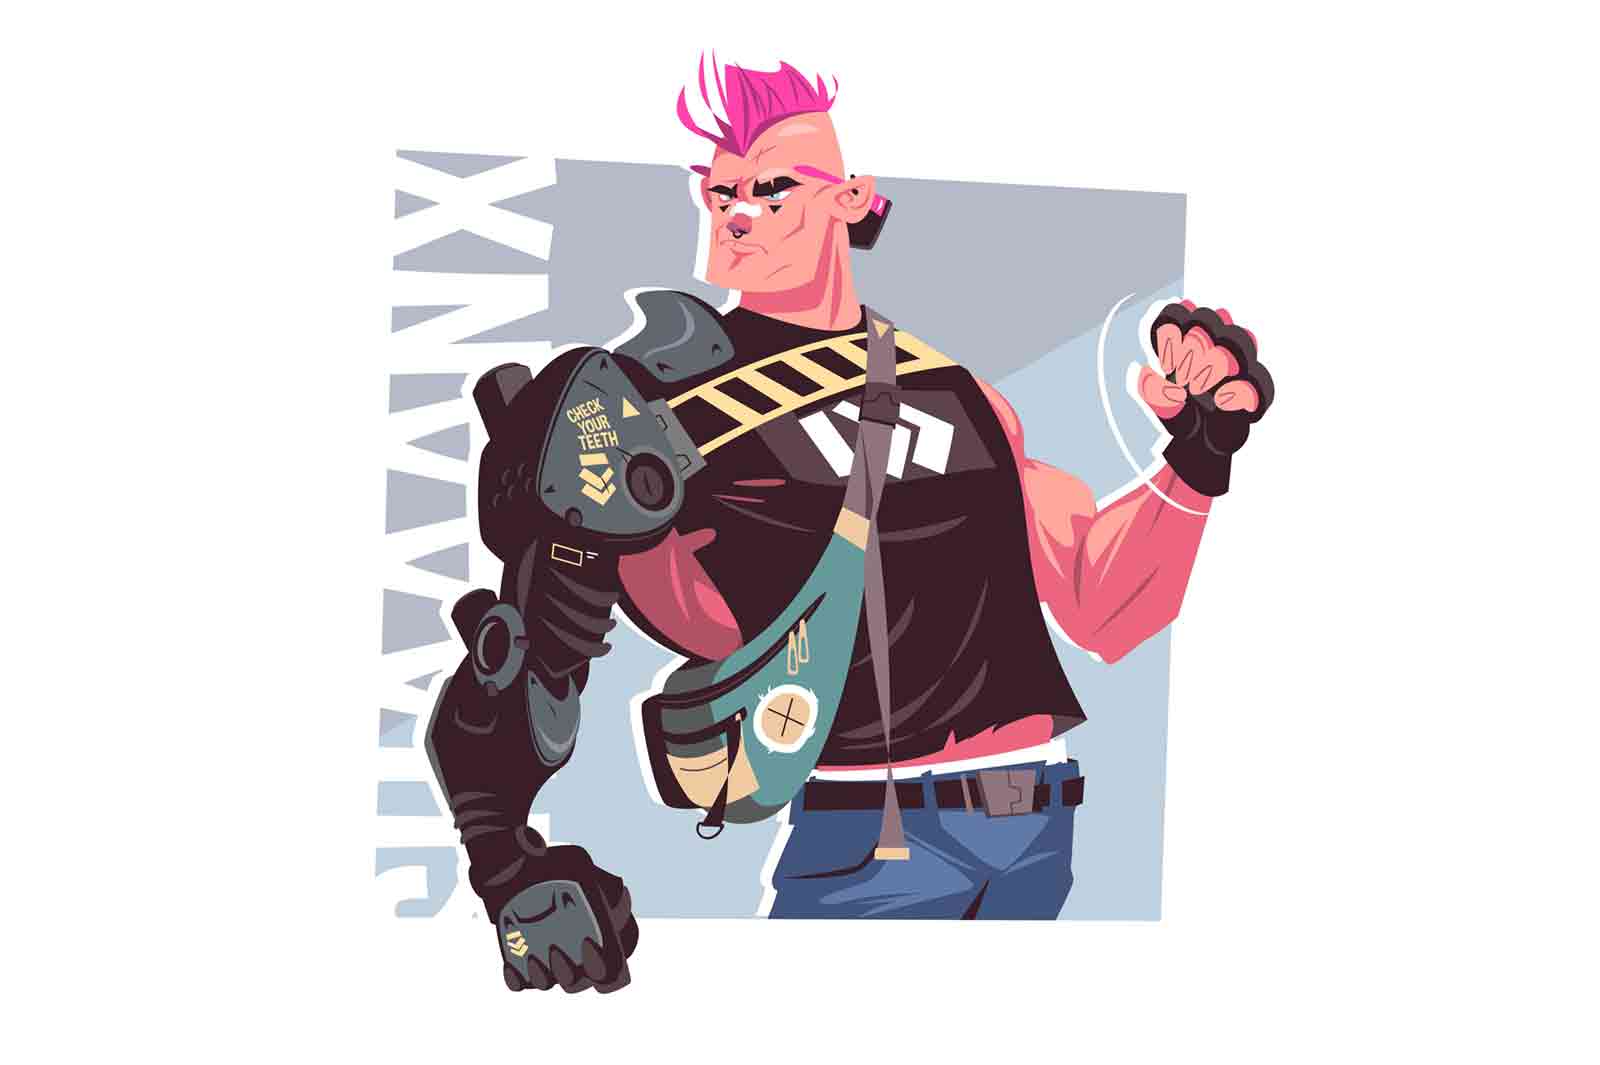 Aggressive-minded man in punk style vector illustration. Cool bright outfit, pink mohawk flat style. Popular punk subculture and hooligans lifestyle concept. Isolated on white background